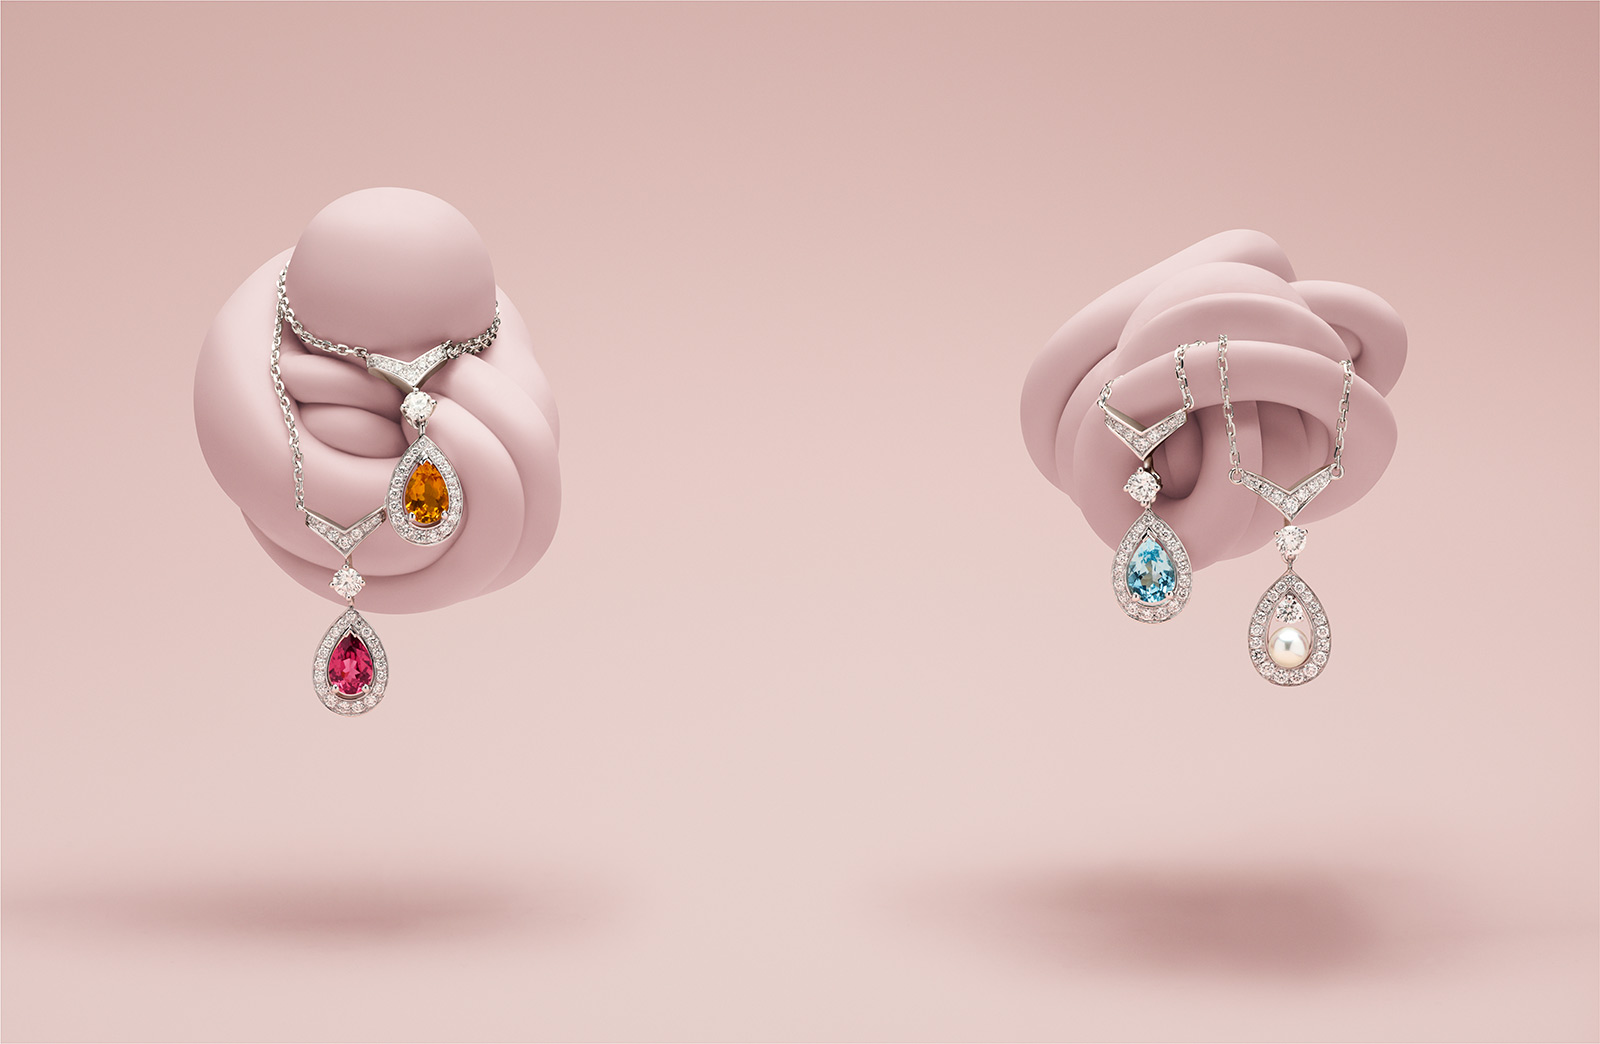 Chaumet 'Joséphine Aigrette' necklaces with 0.60ct of; rhodolite garnet, citrine, and aquamarine, with pearl and diamonds